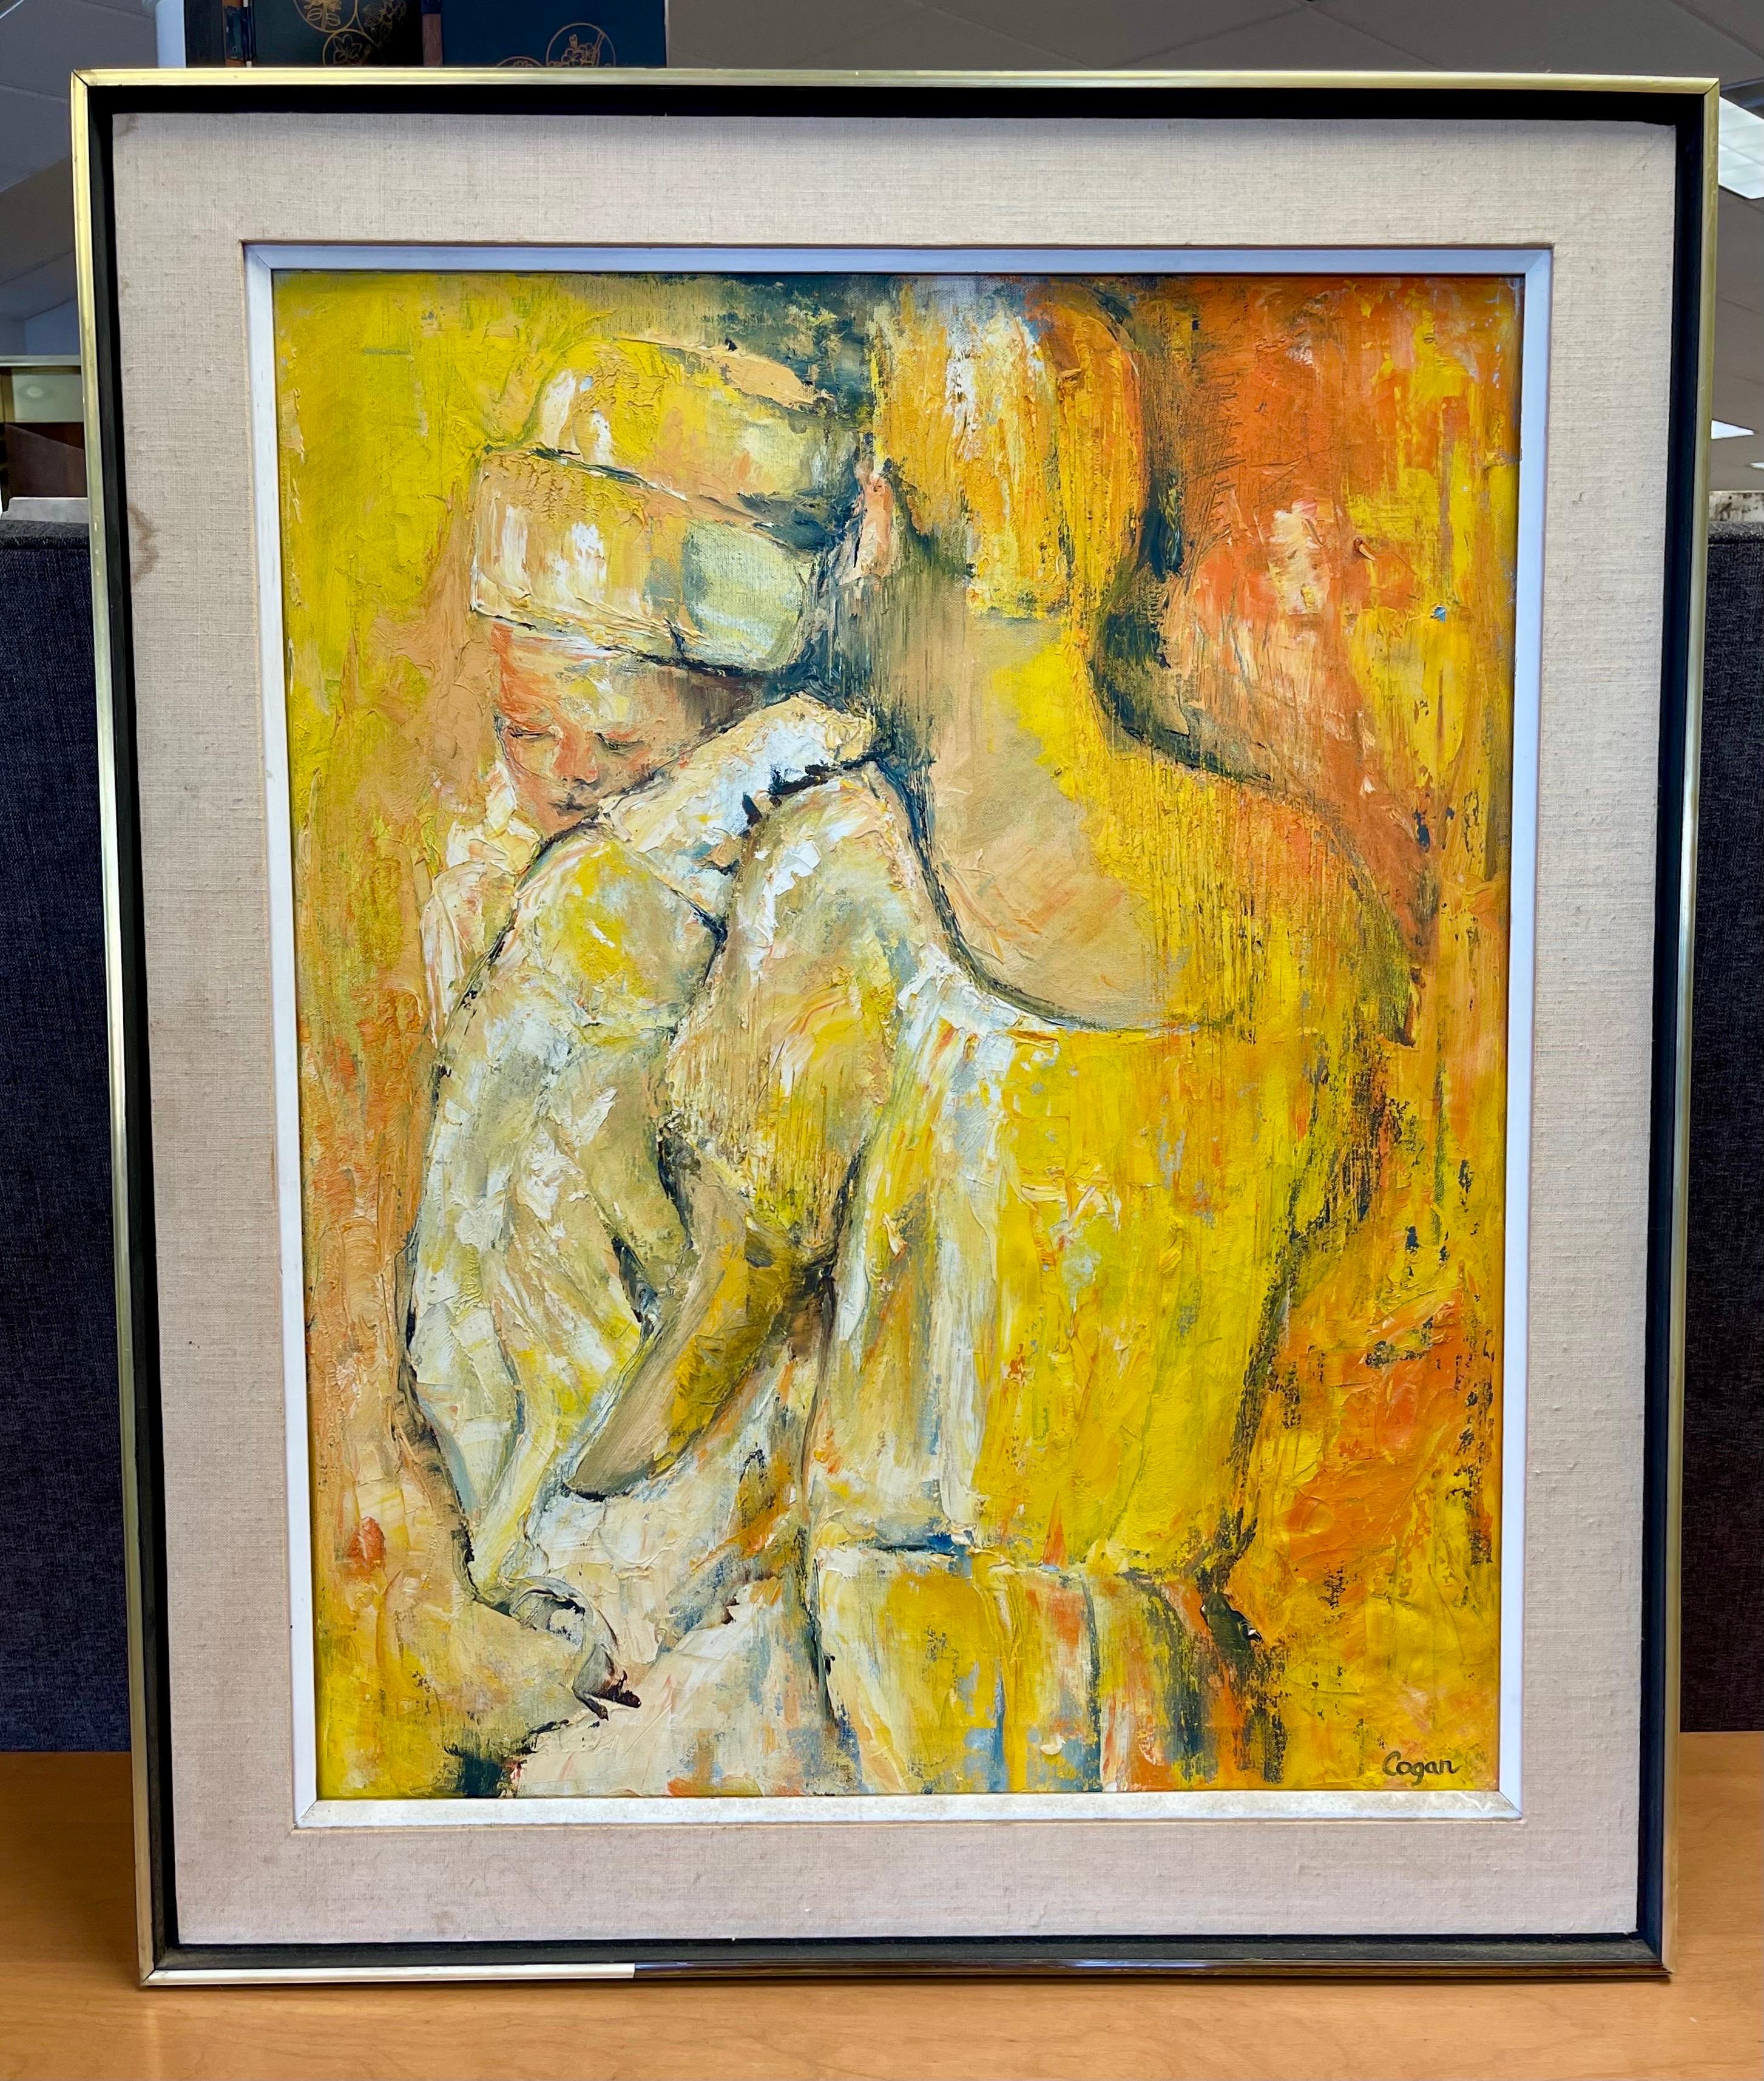 Coveted, original signed mid century abstract by Connecticut artist Carol Cogan, circa 1970's. Great scale and color scheme depicting a baby in her mother's arms. Original frame. Medium is oil on canvas. Why not own the best.